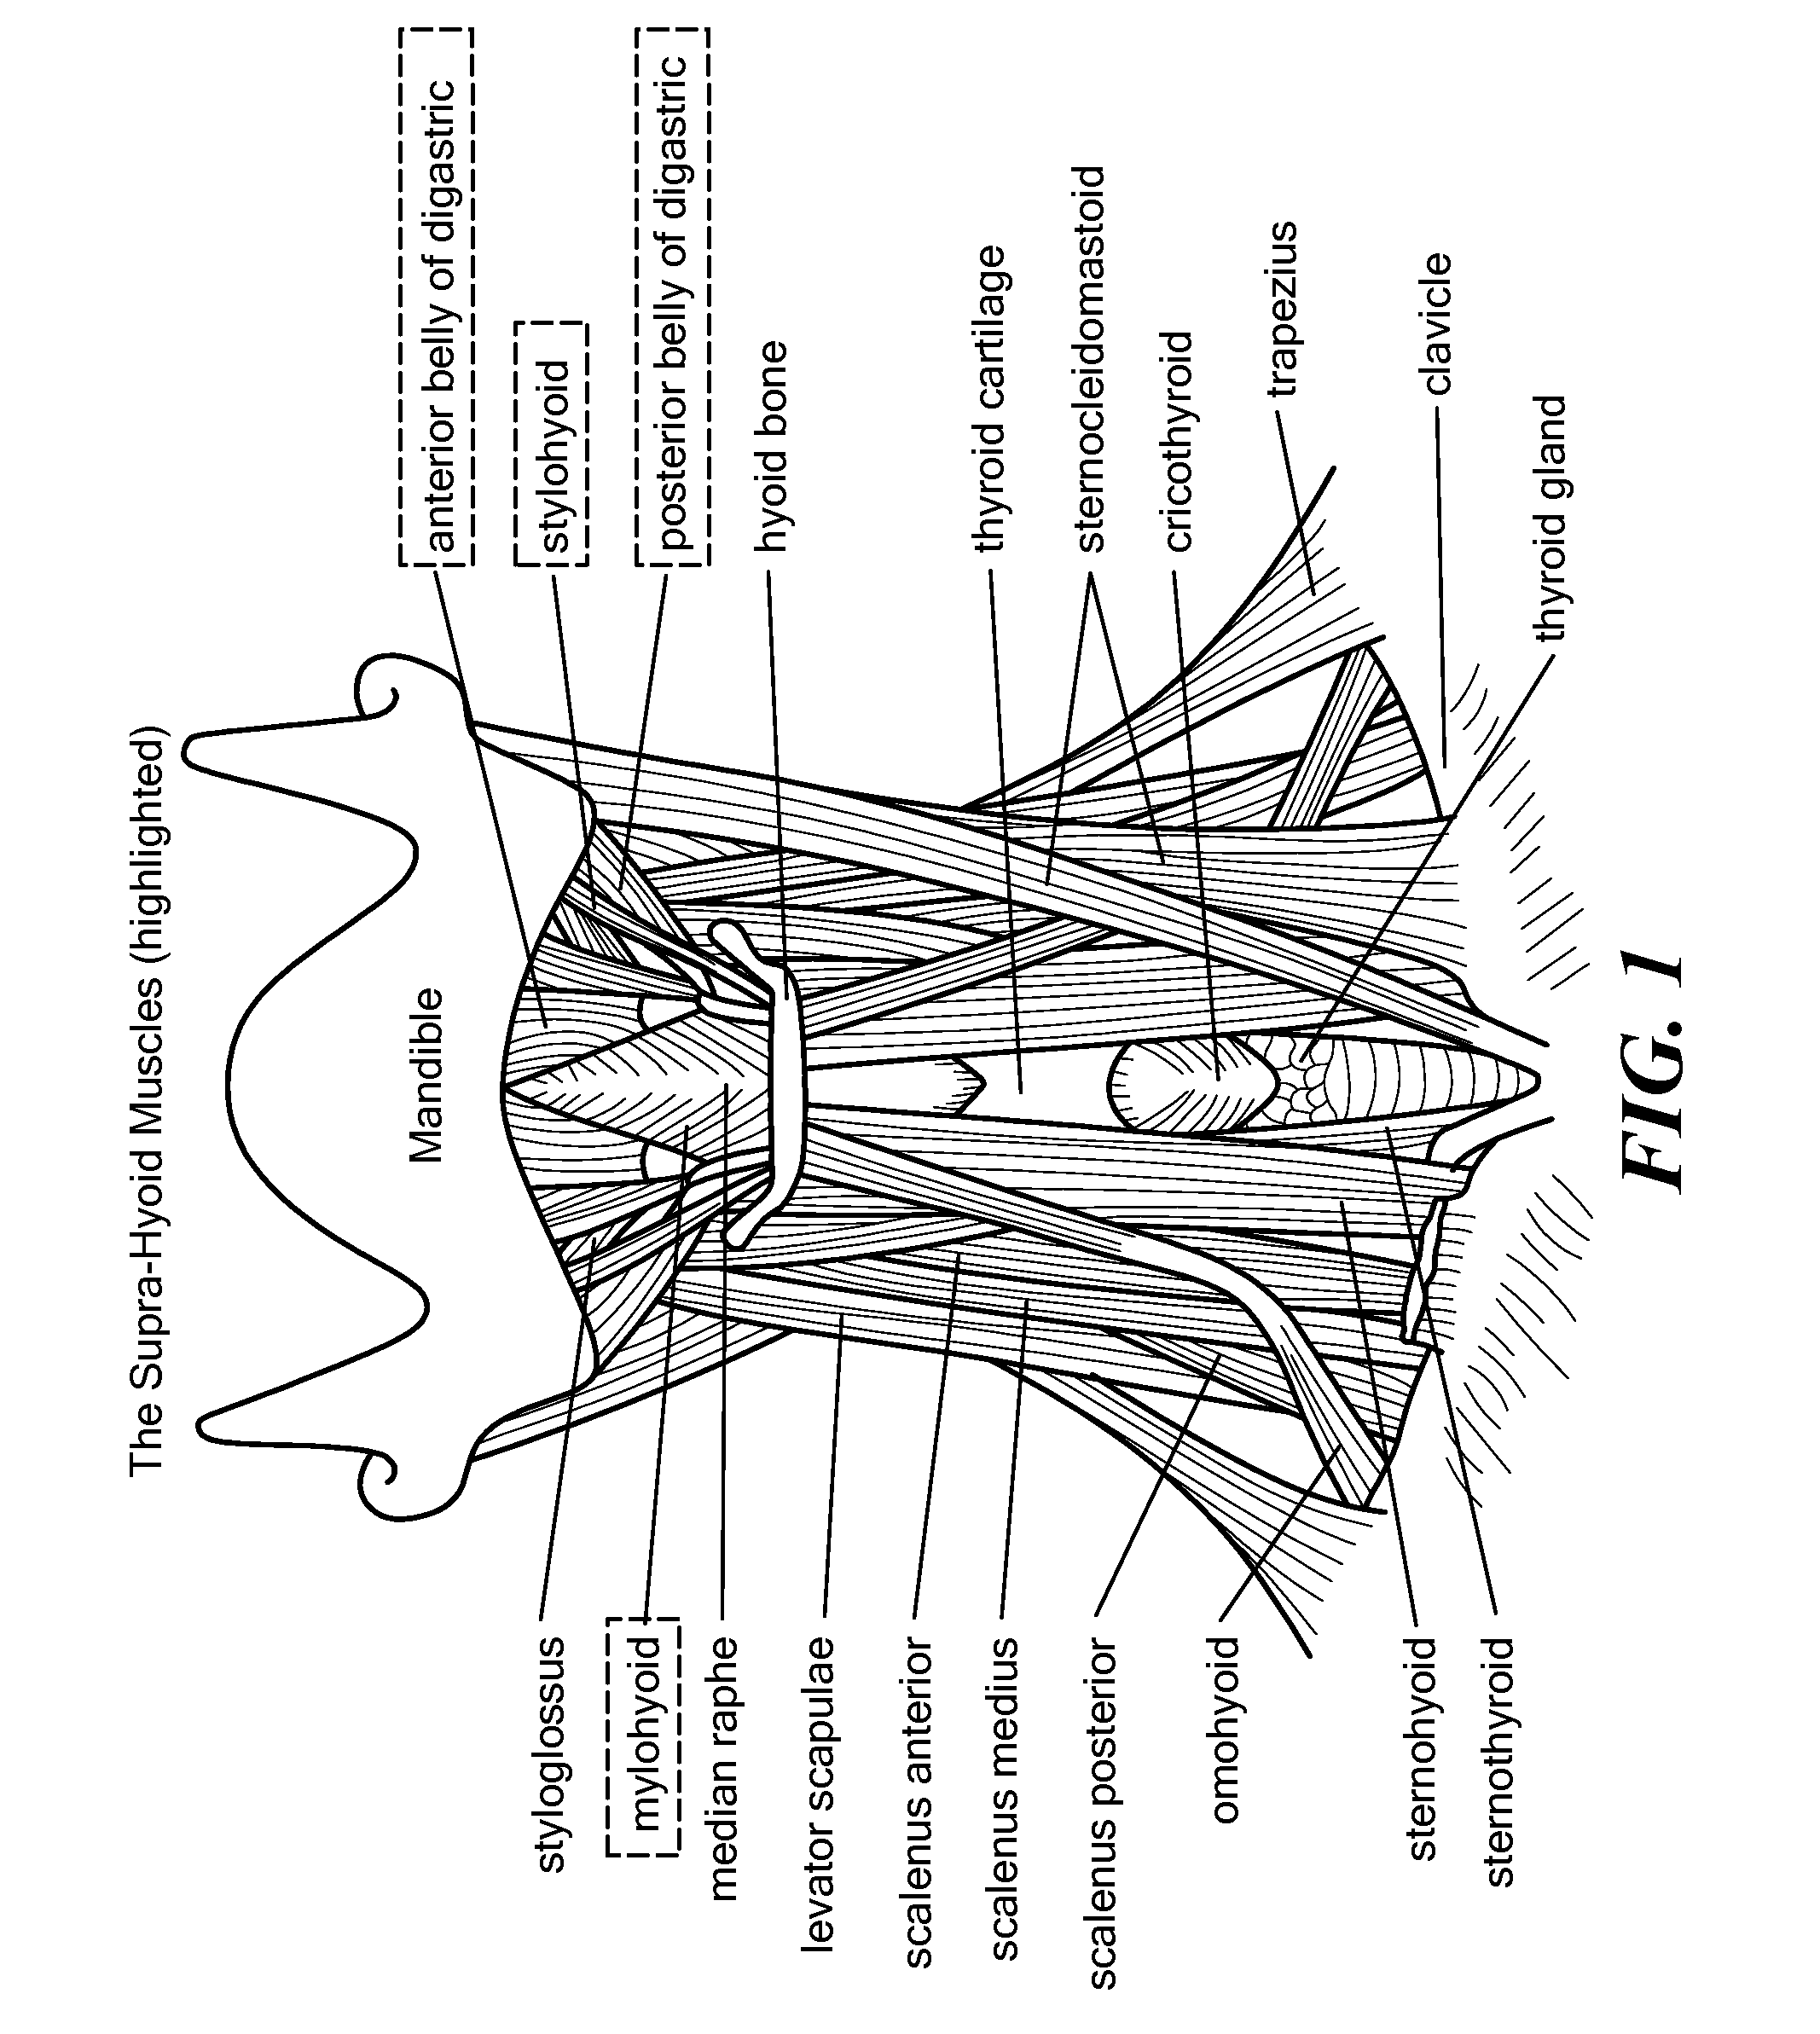 Method for modifying larynx position by trans-positioning muscle and electrode stimulation